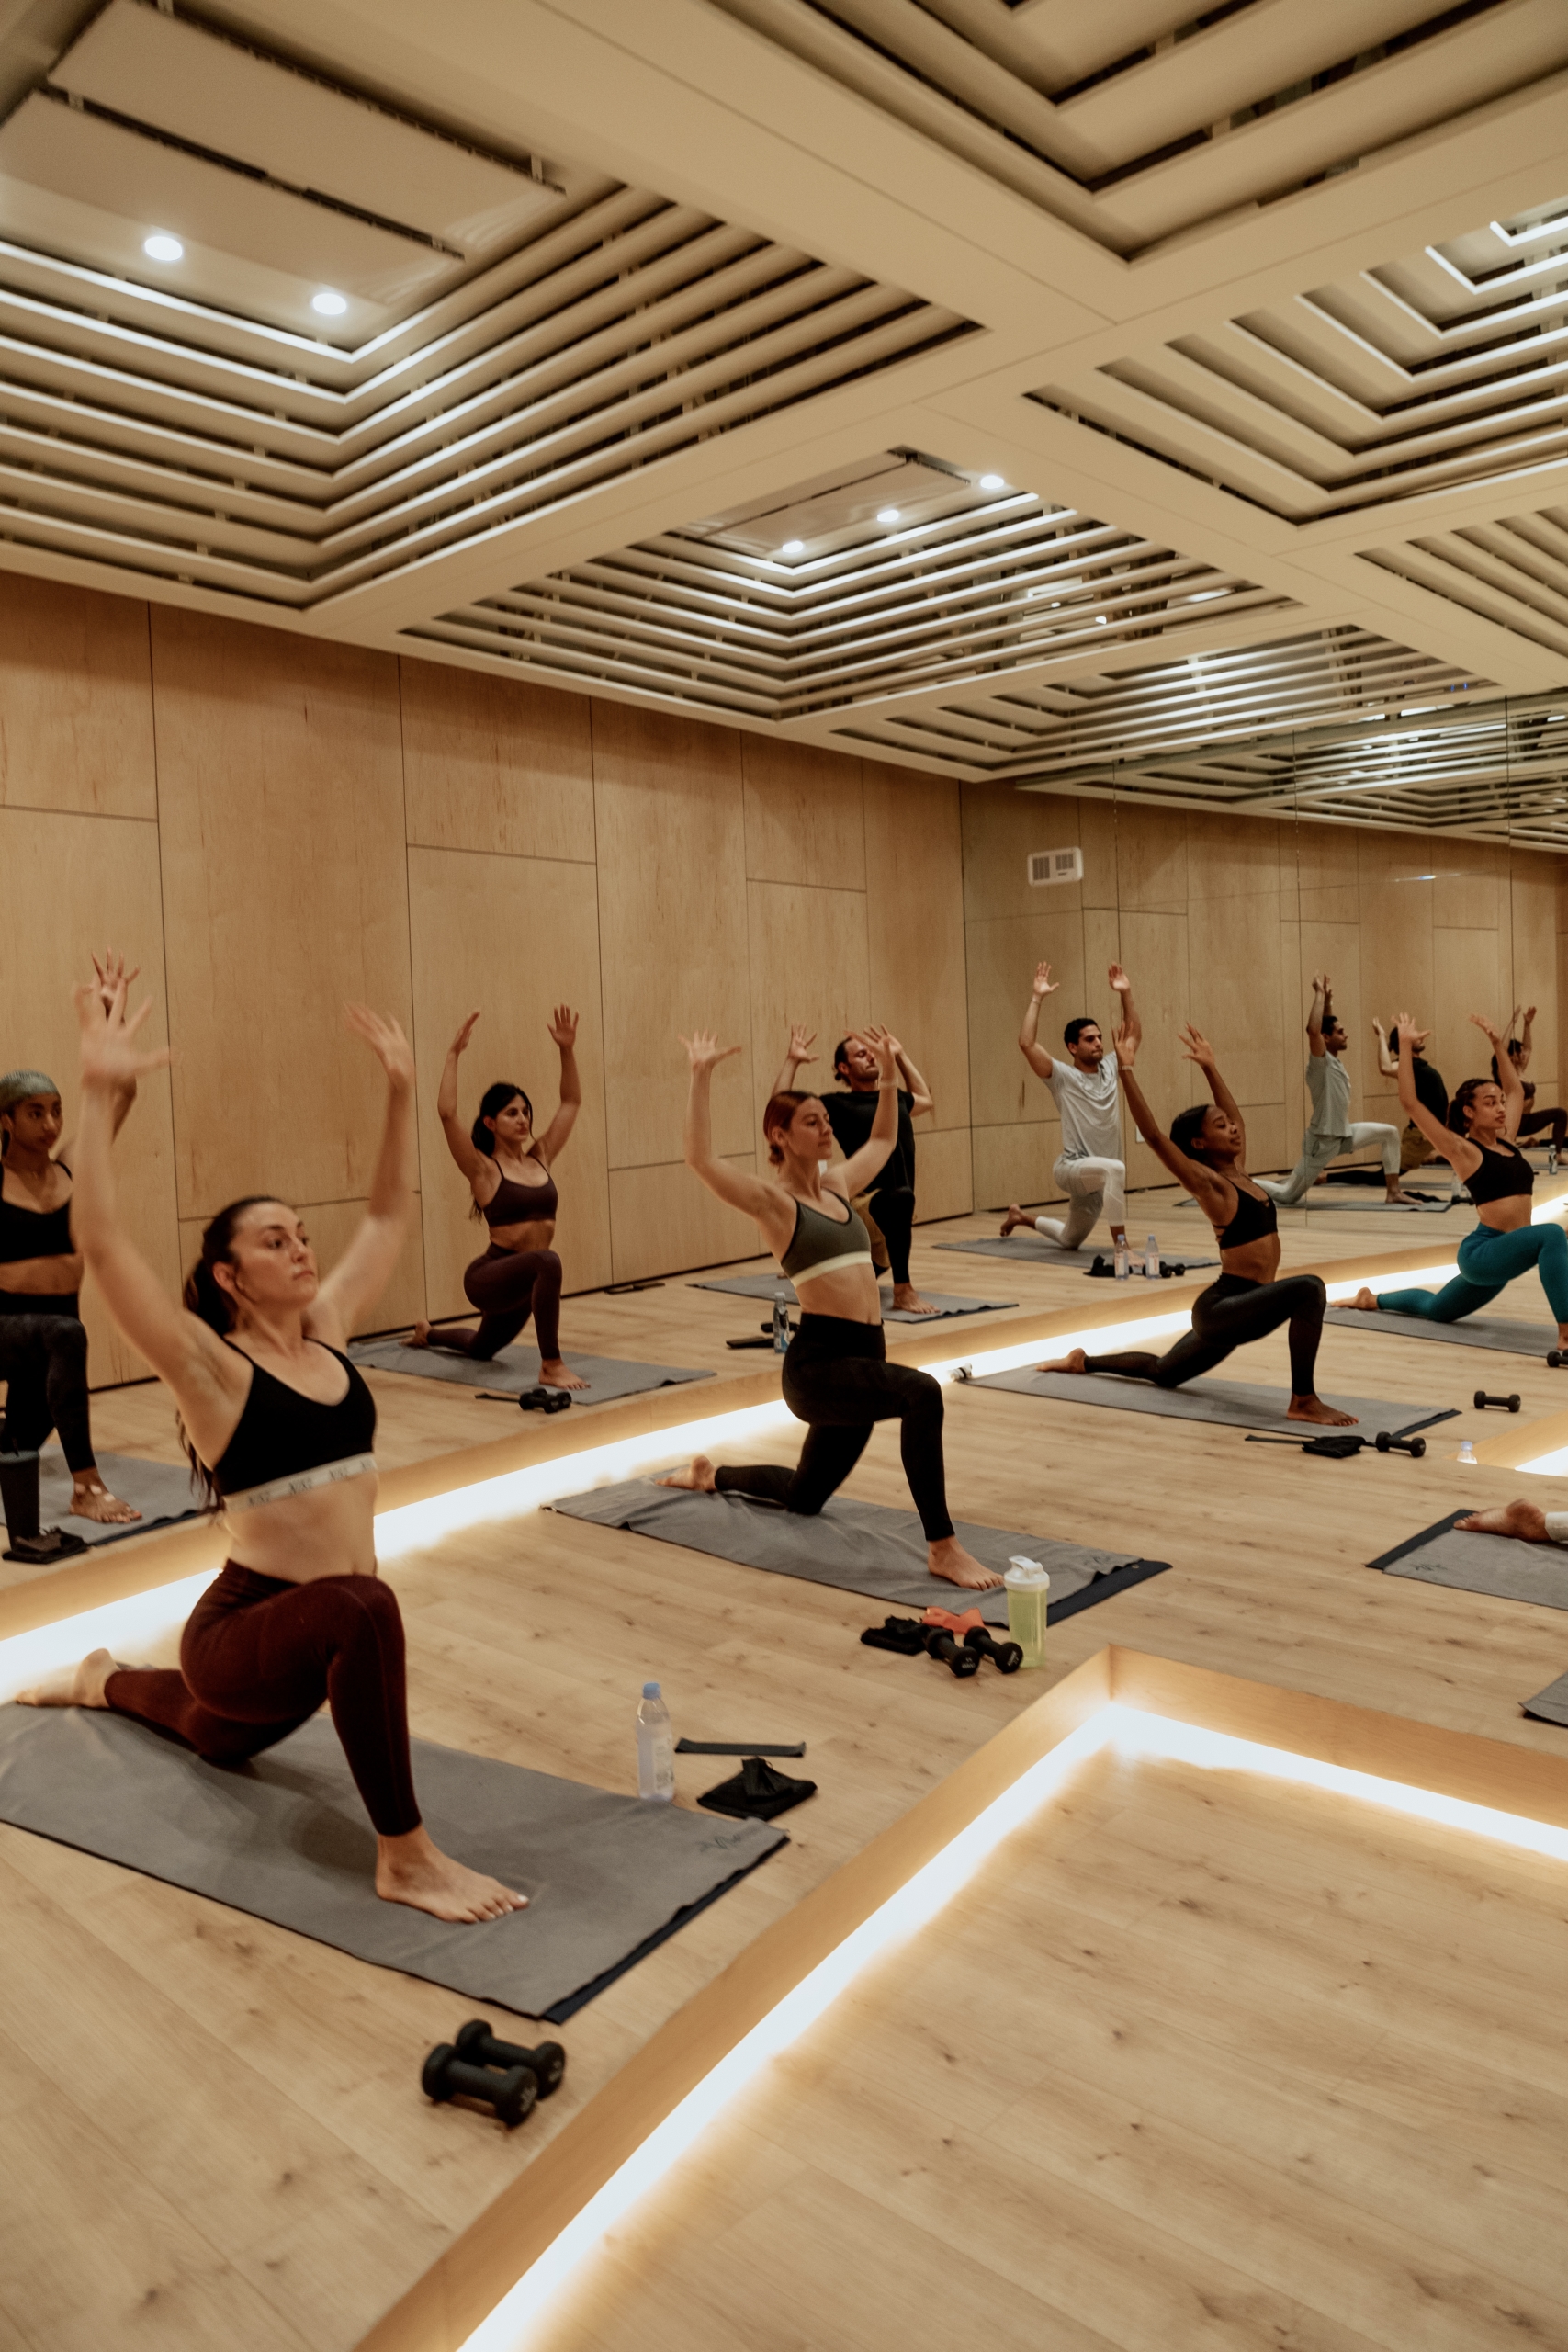 An image of several people doing a yoga pose during a class at the Heated Room.